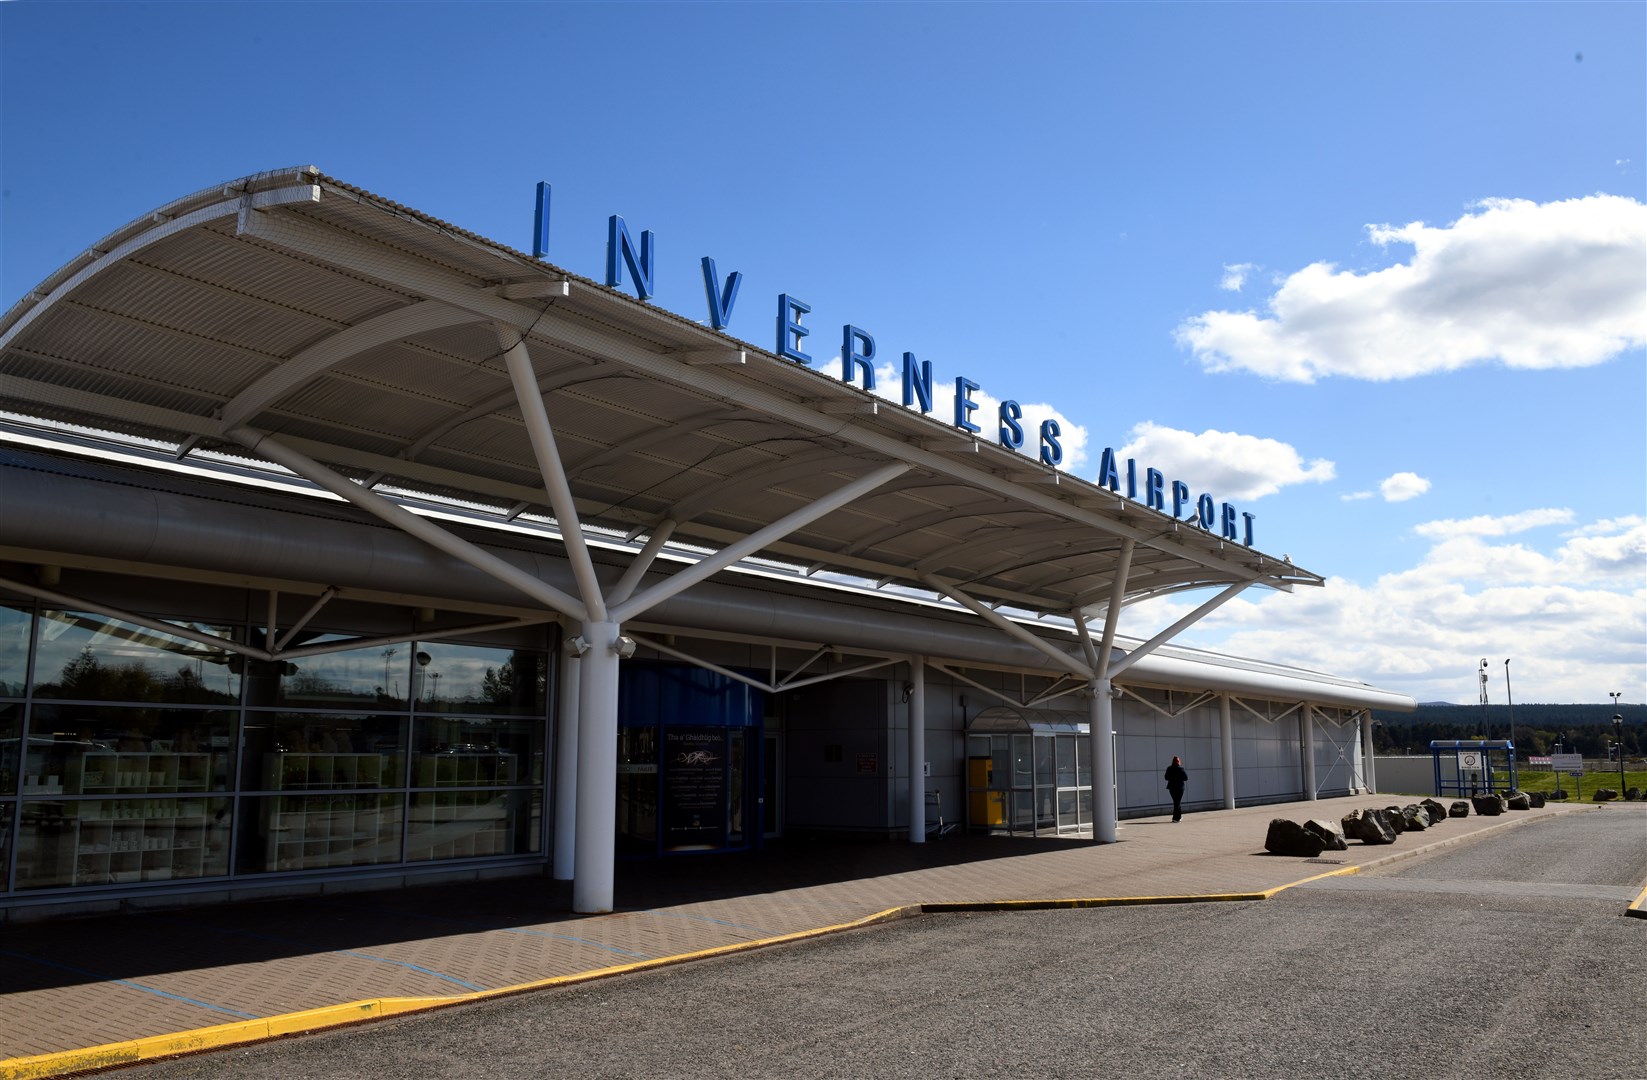 Two airlines have cancelled flights today at Inverness Airport.